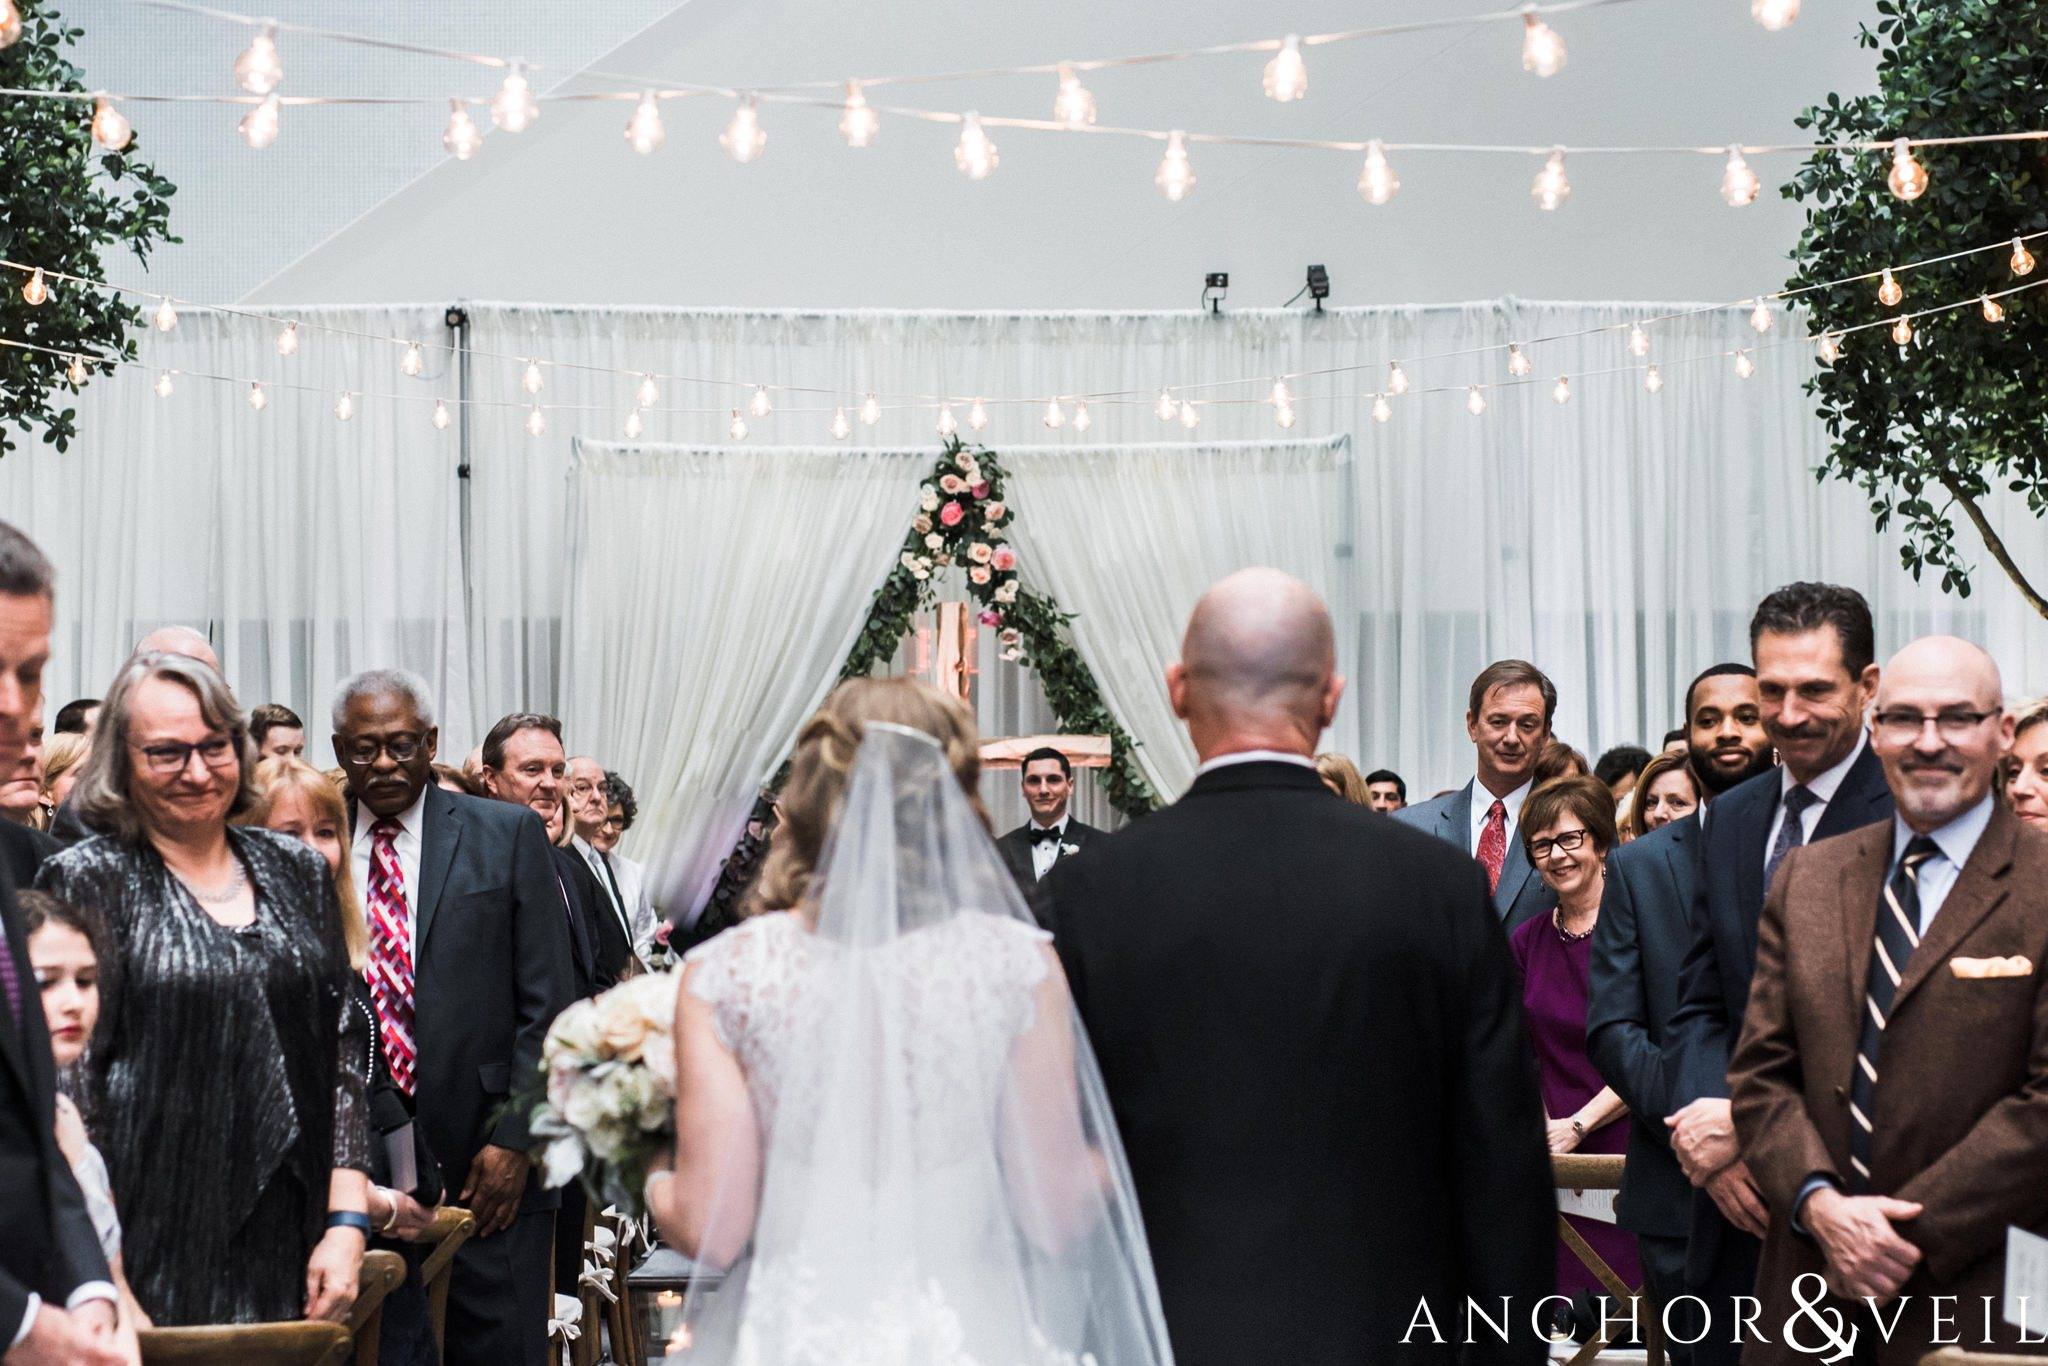 walking down the aisle in the ceremony during their ritz Carlton wedding in Uptown Charlotte NC